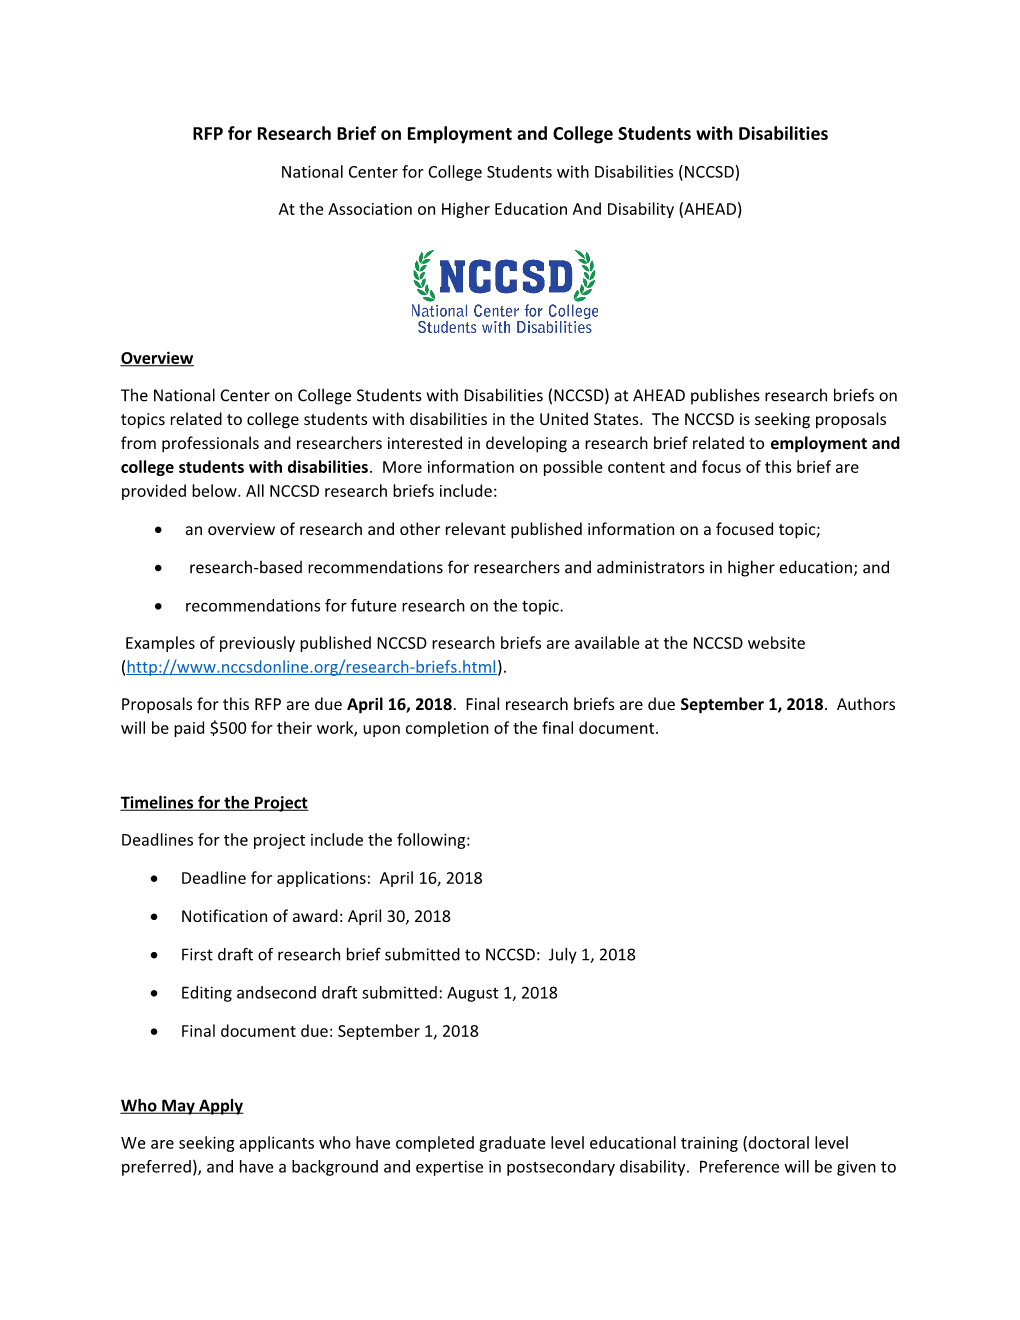 RFP for Research Brief on Employment and College Students with Disabilities